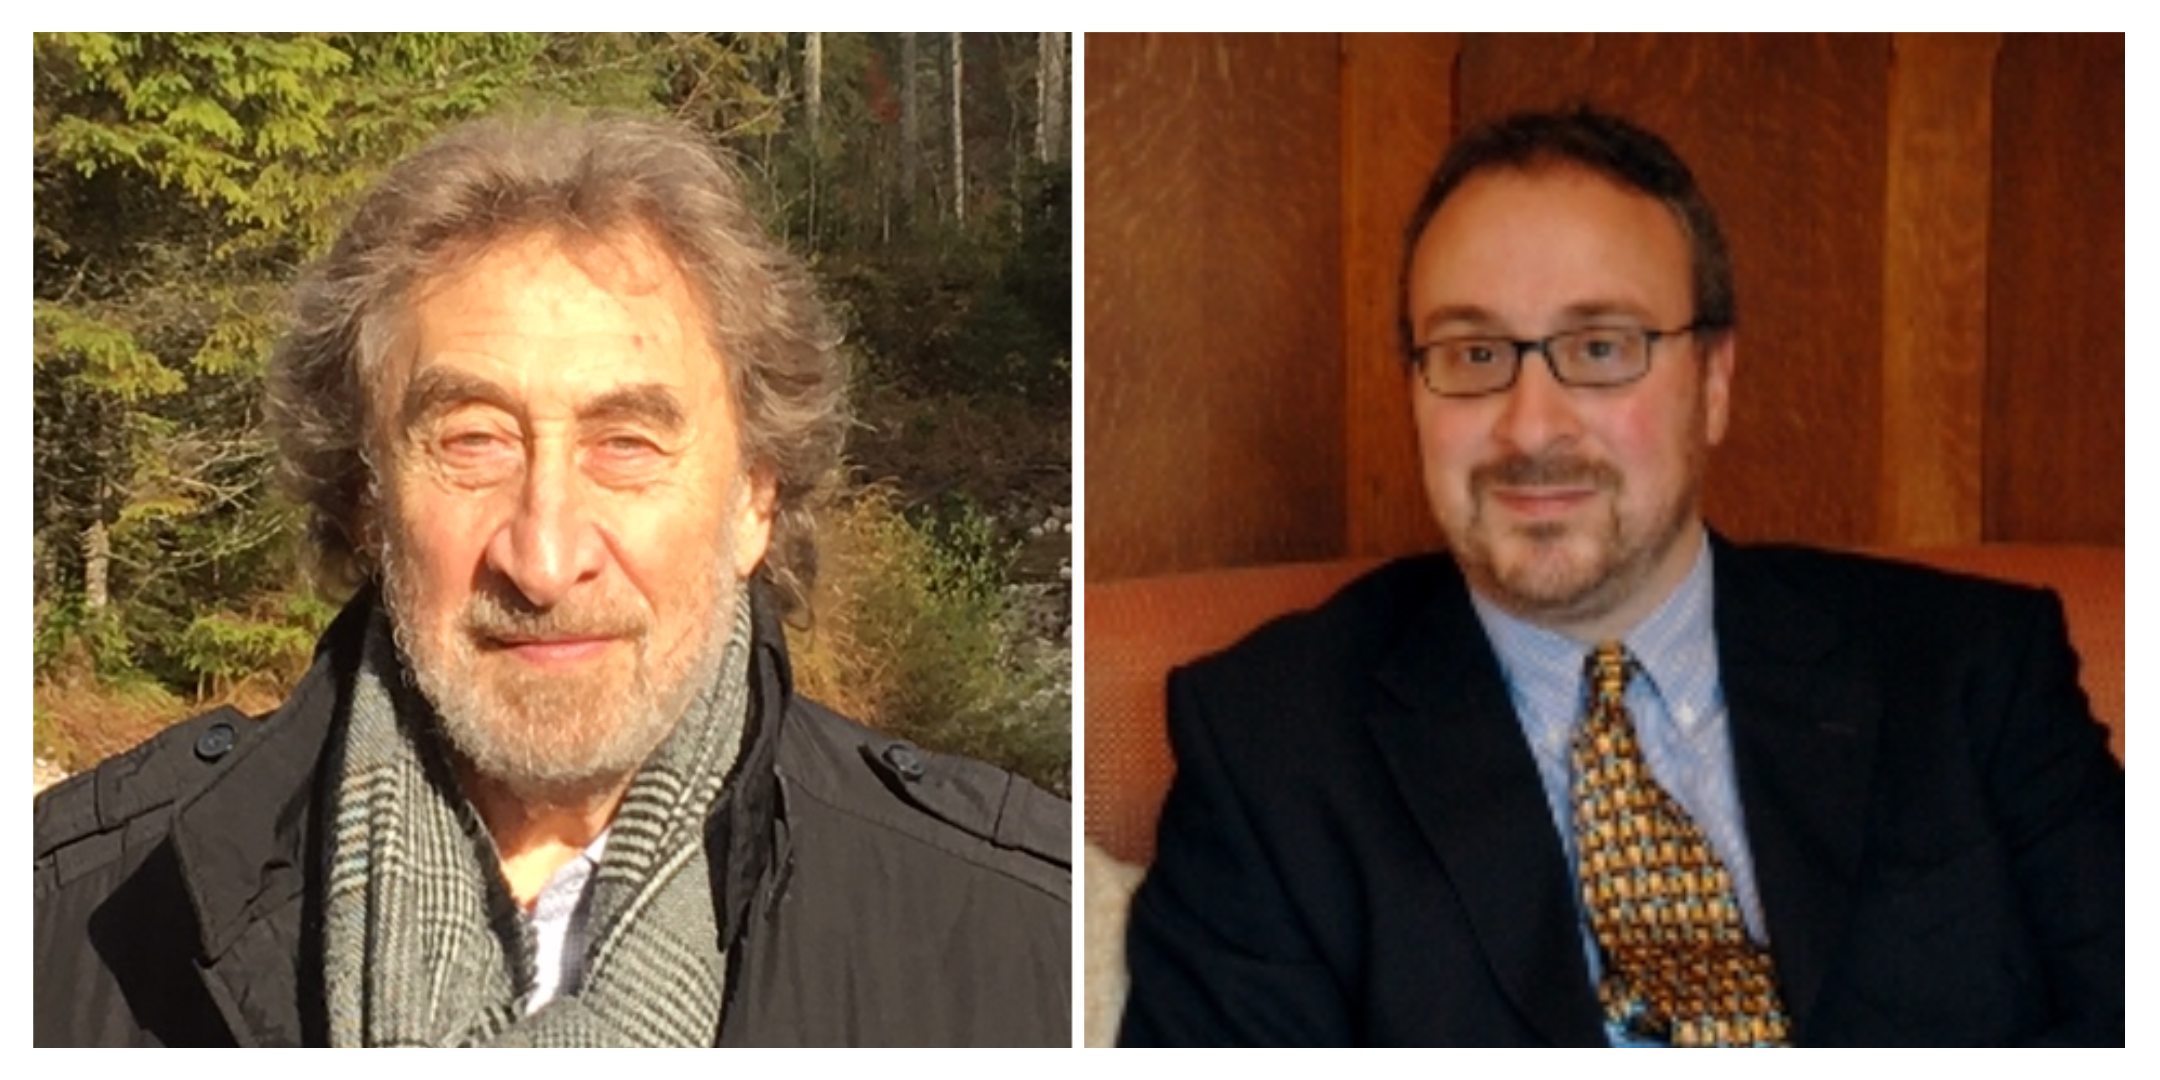 Howard Jacobson (Left) and Bryan Cheyette (Right)